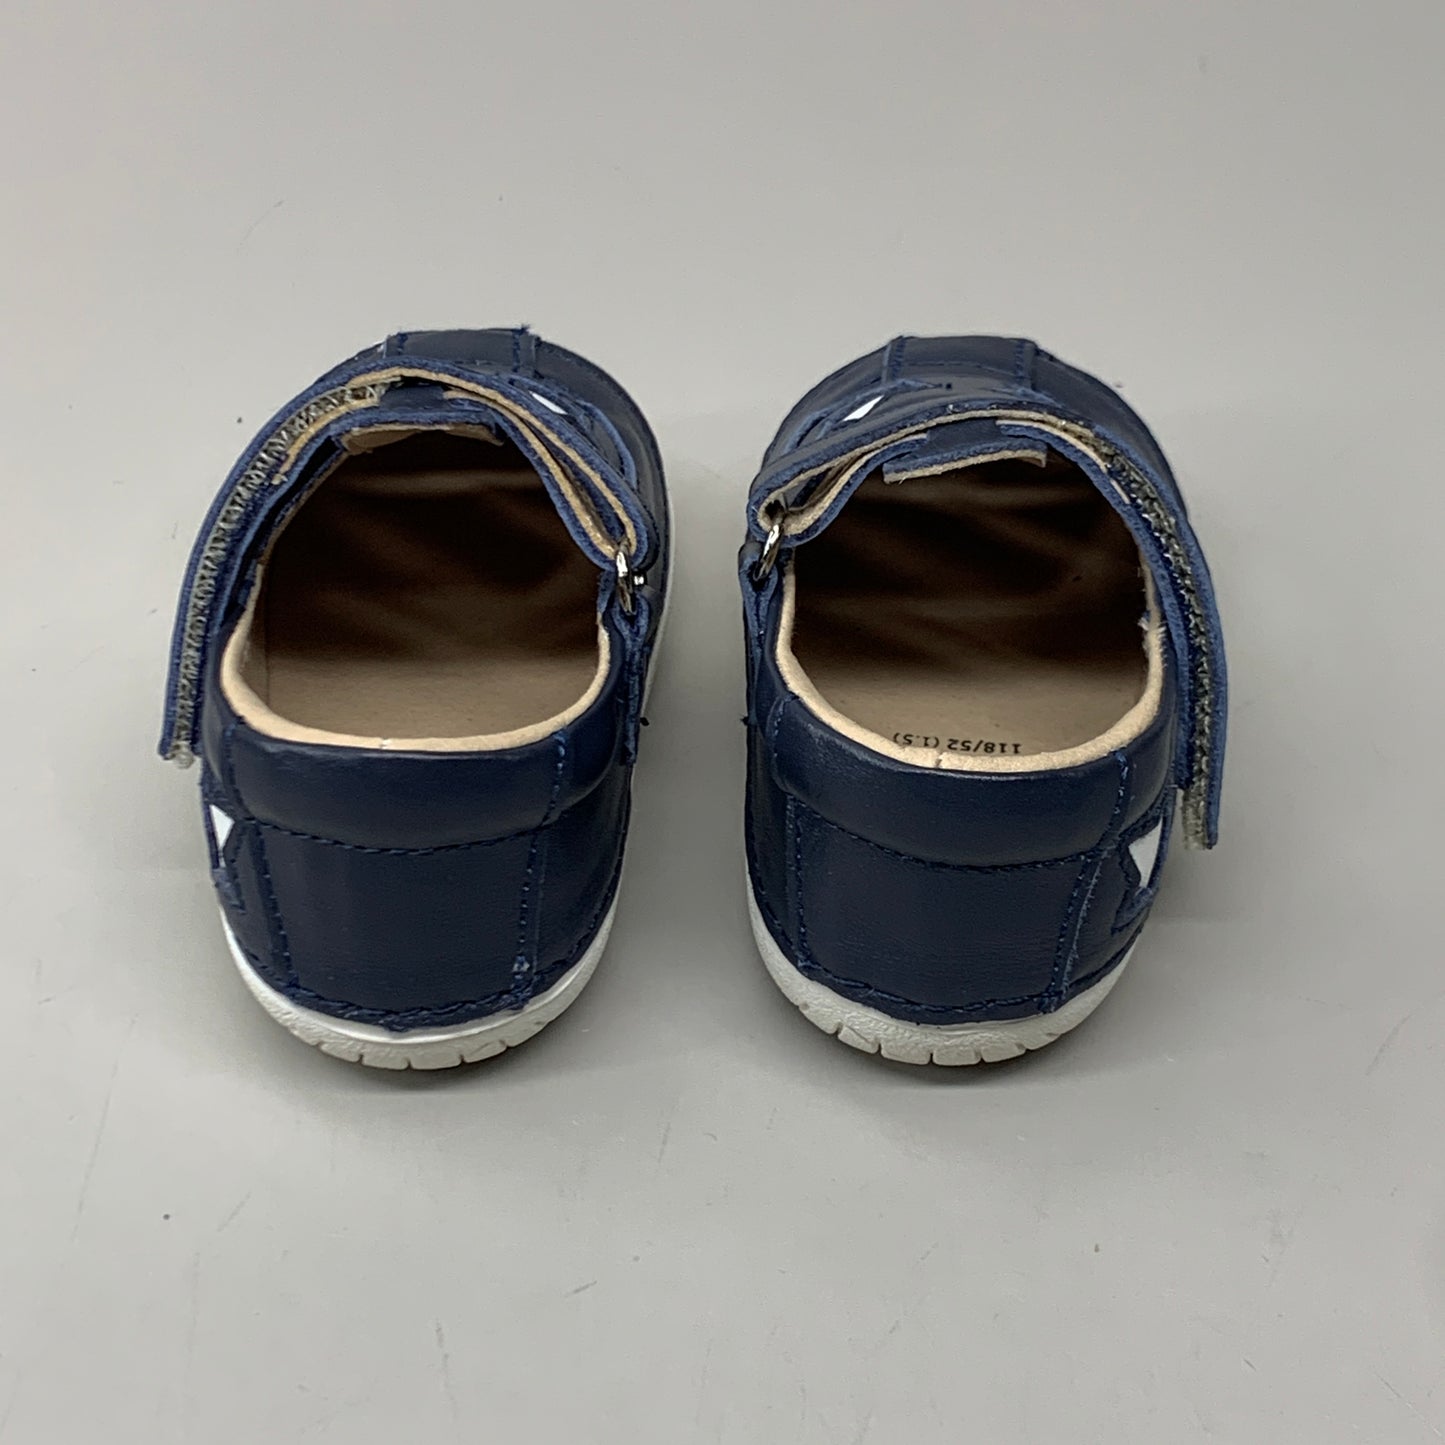 OLD SOLES Baby's Springy Pave Leather Shoes Sz 4 EU 20 Navy / Snow #4080